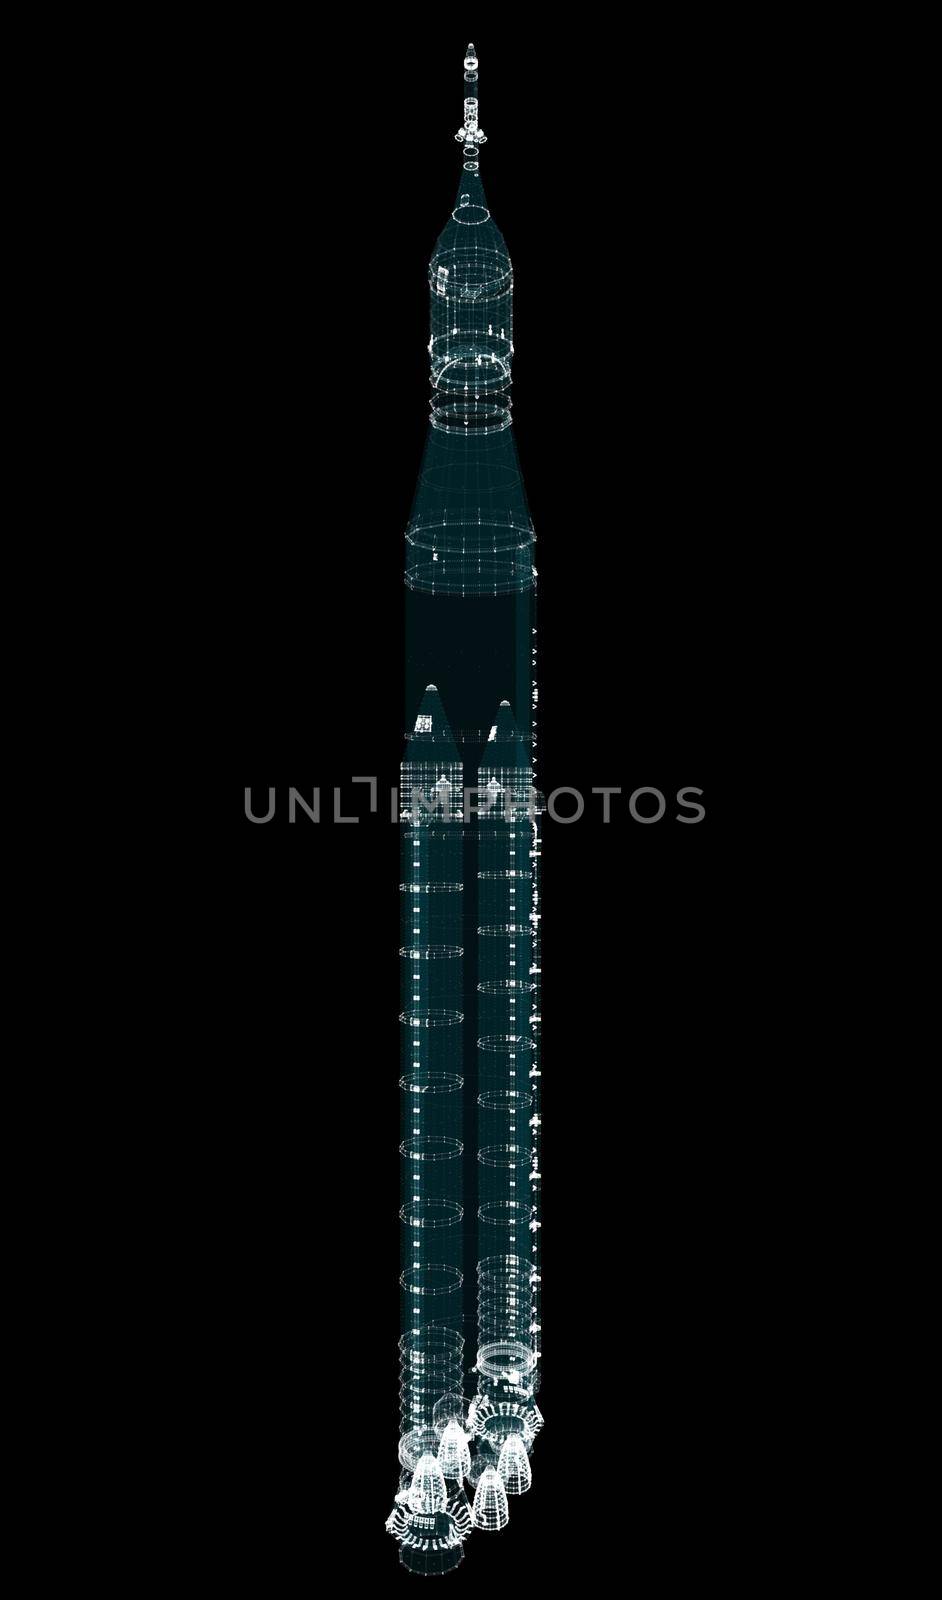 Abstract space rocket of particles. 3d illustration. Elements of this image furnished by NASA